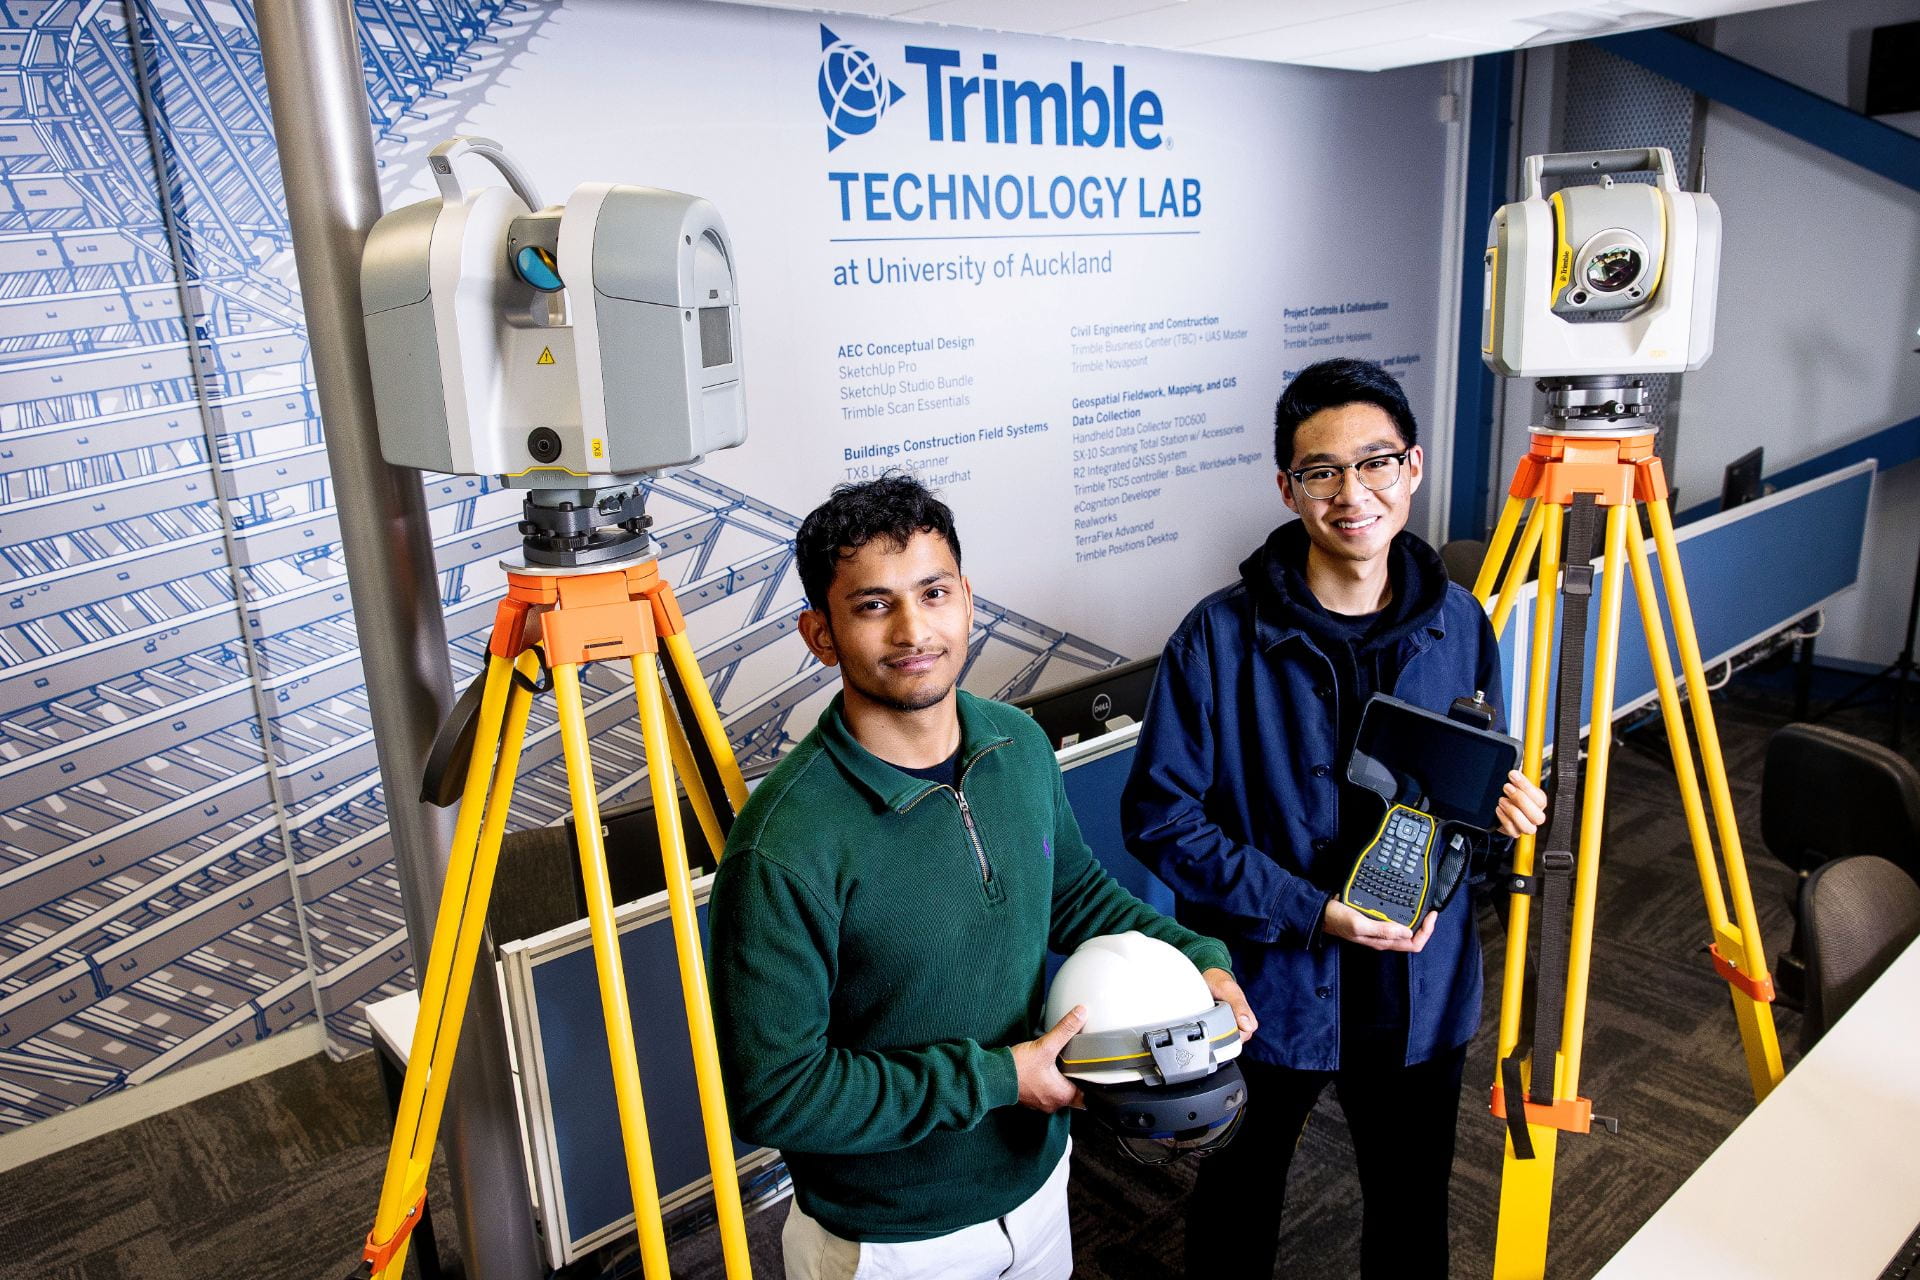 A picture of two students amongst Trimble Technology, inside the Trimble Technology Lab.